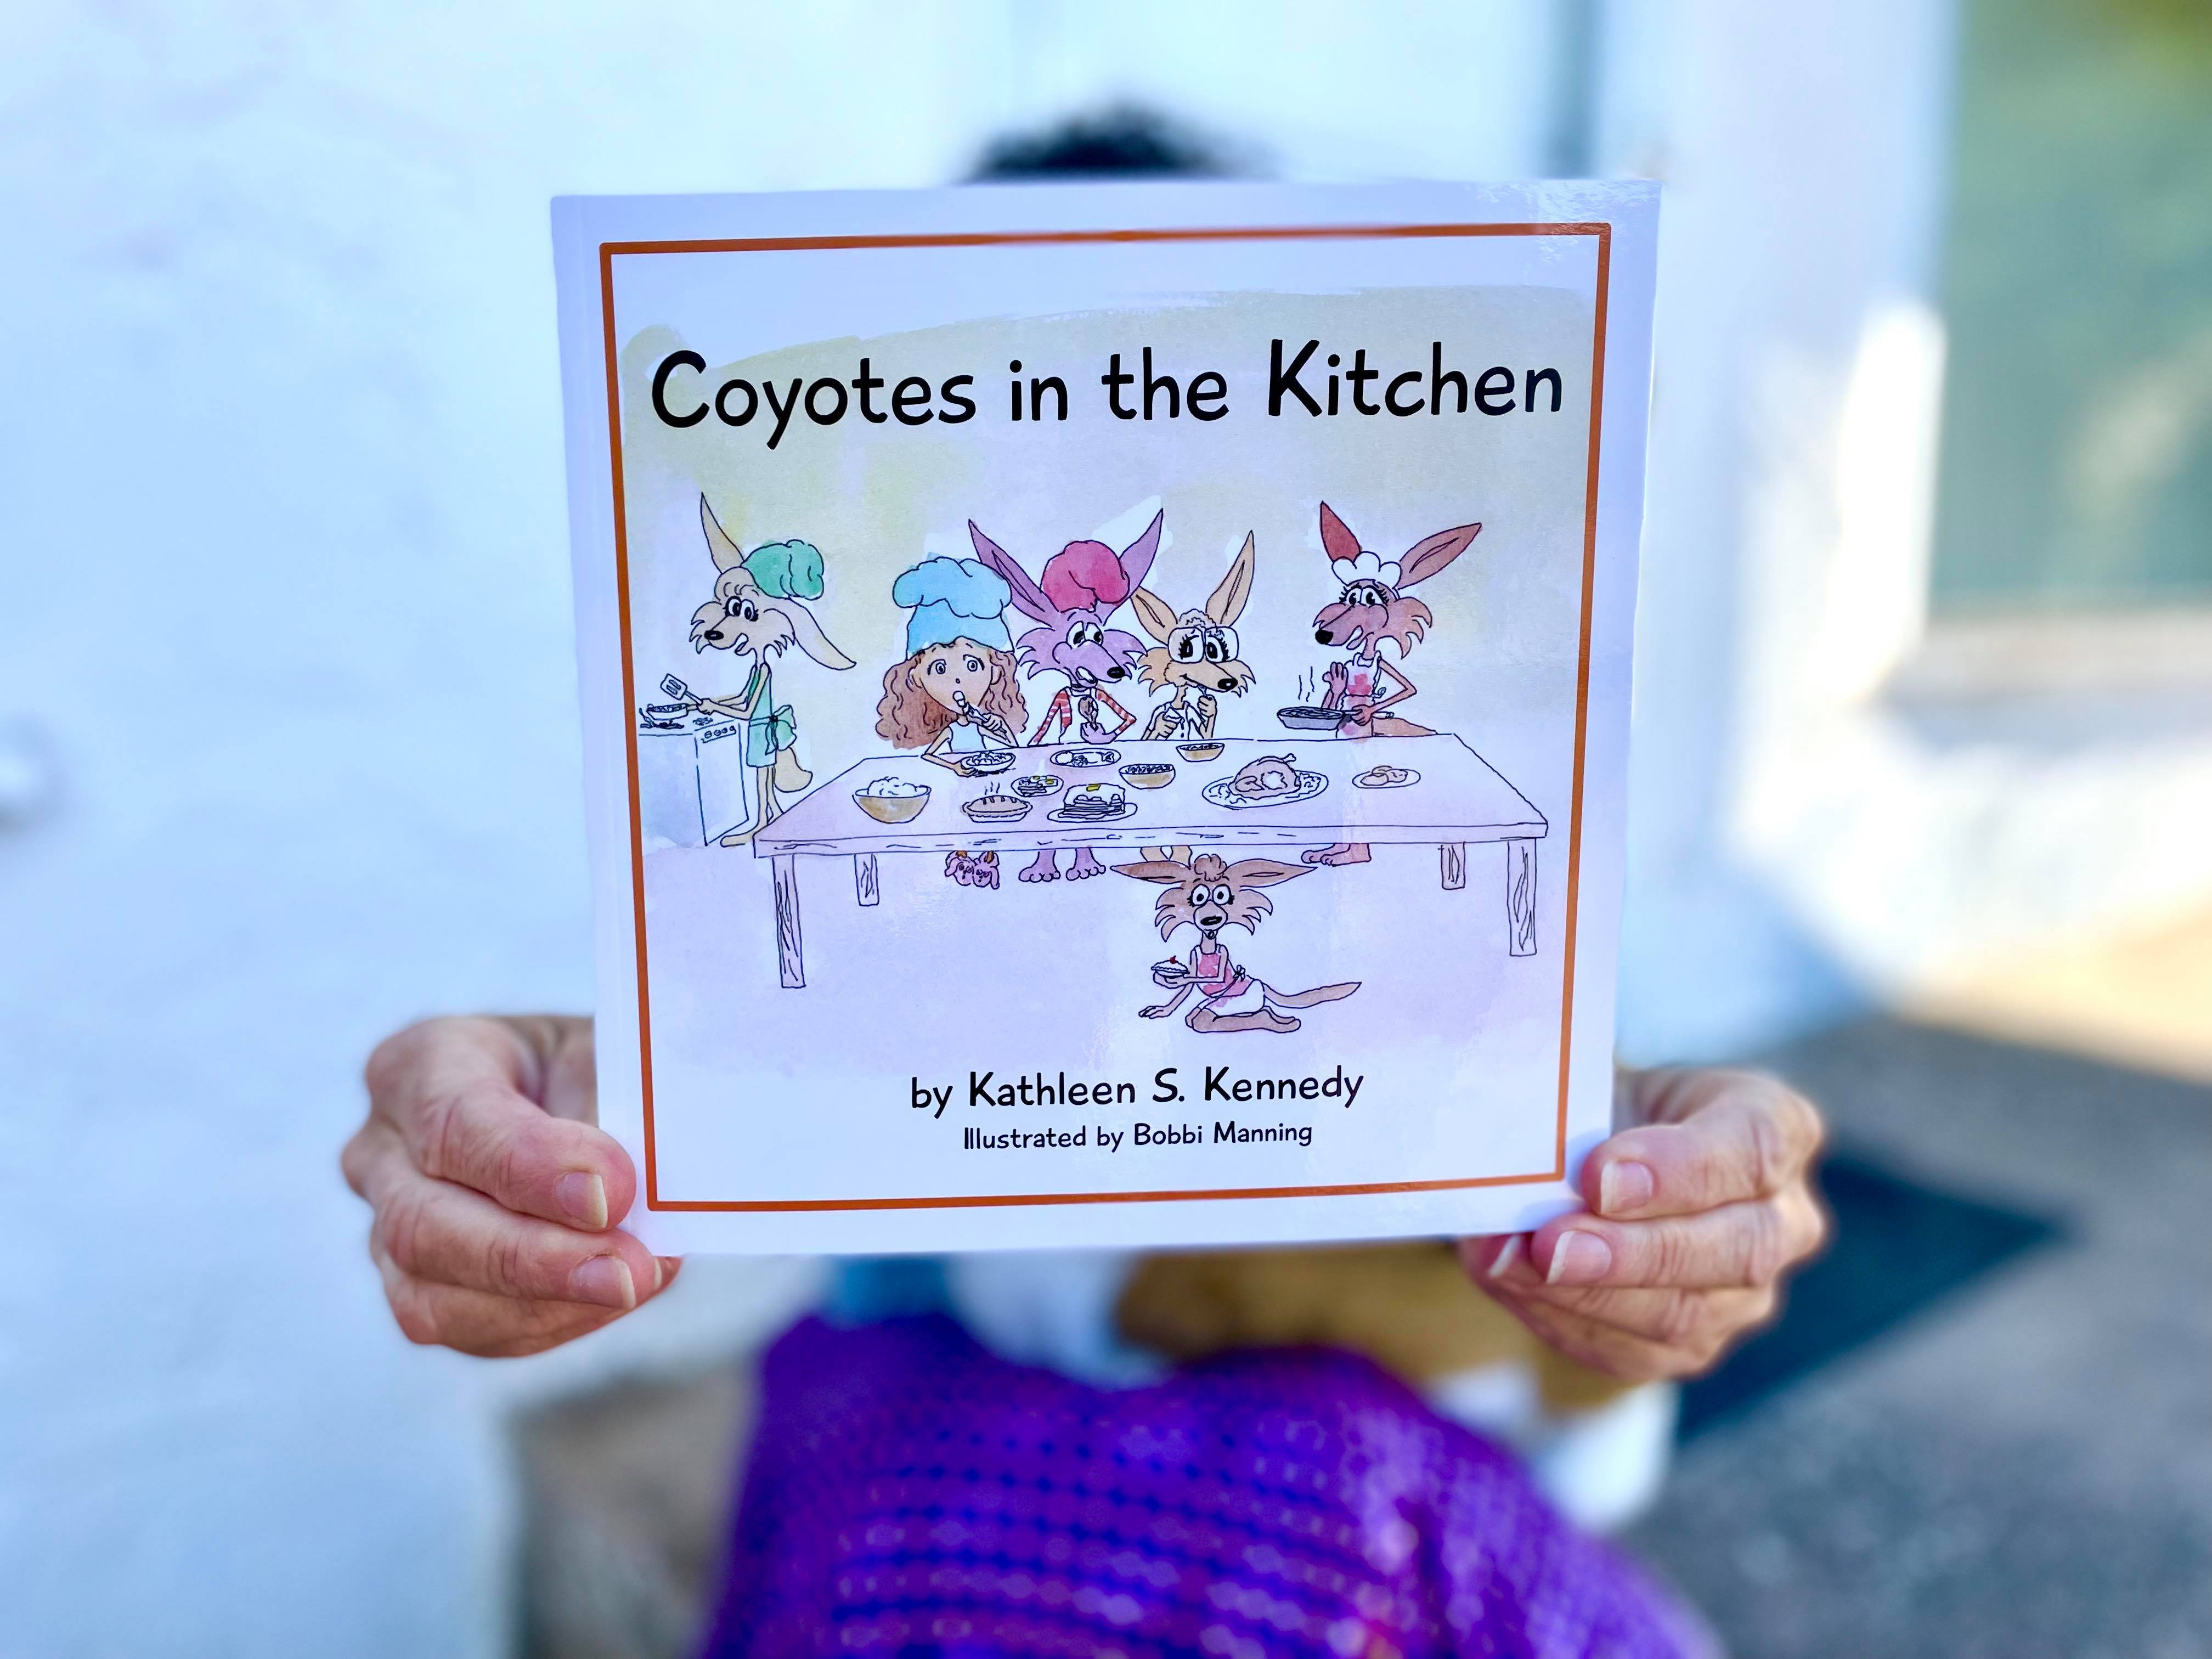 Coyotes in the Kitchen: A Rhyming Coyote Book For Children